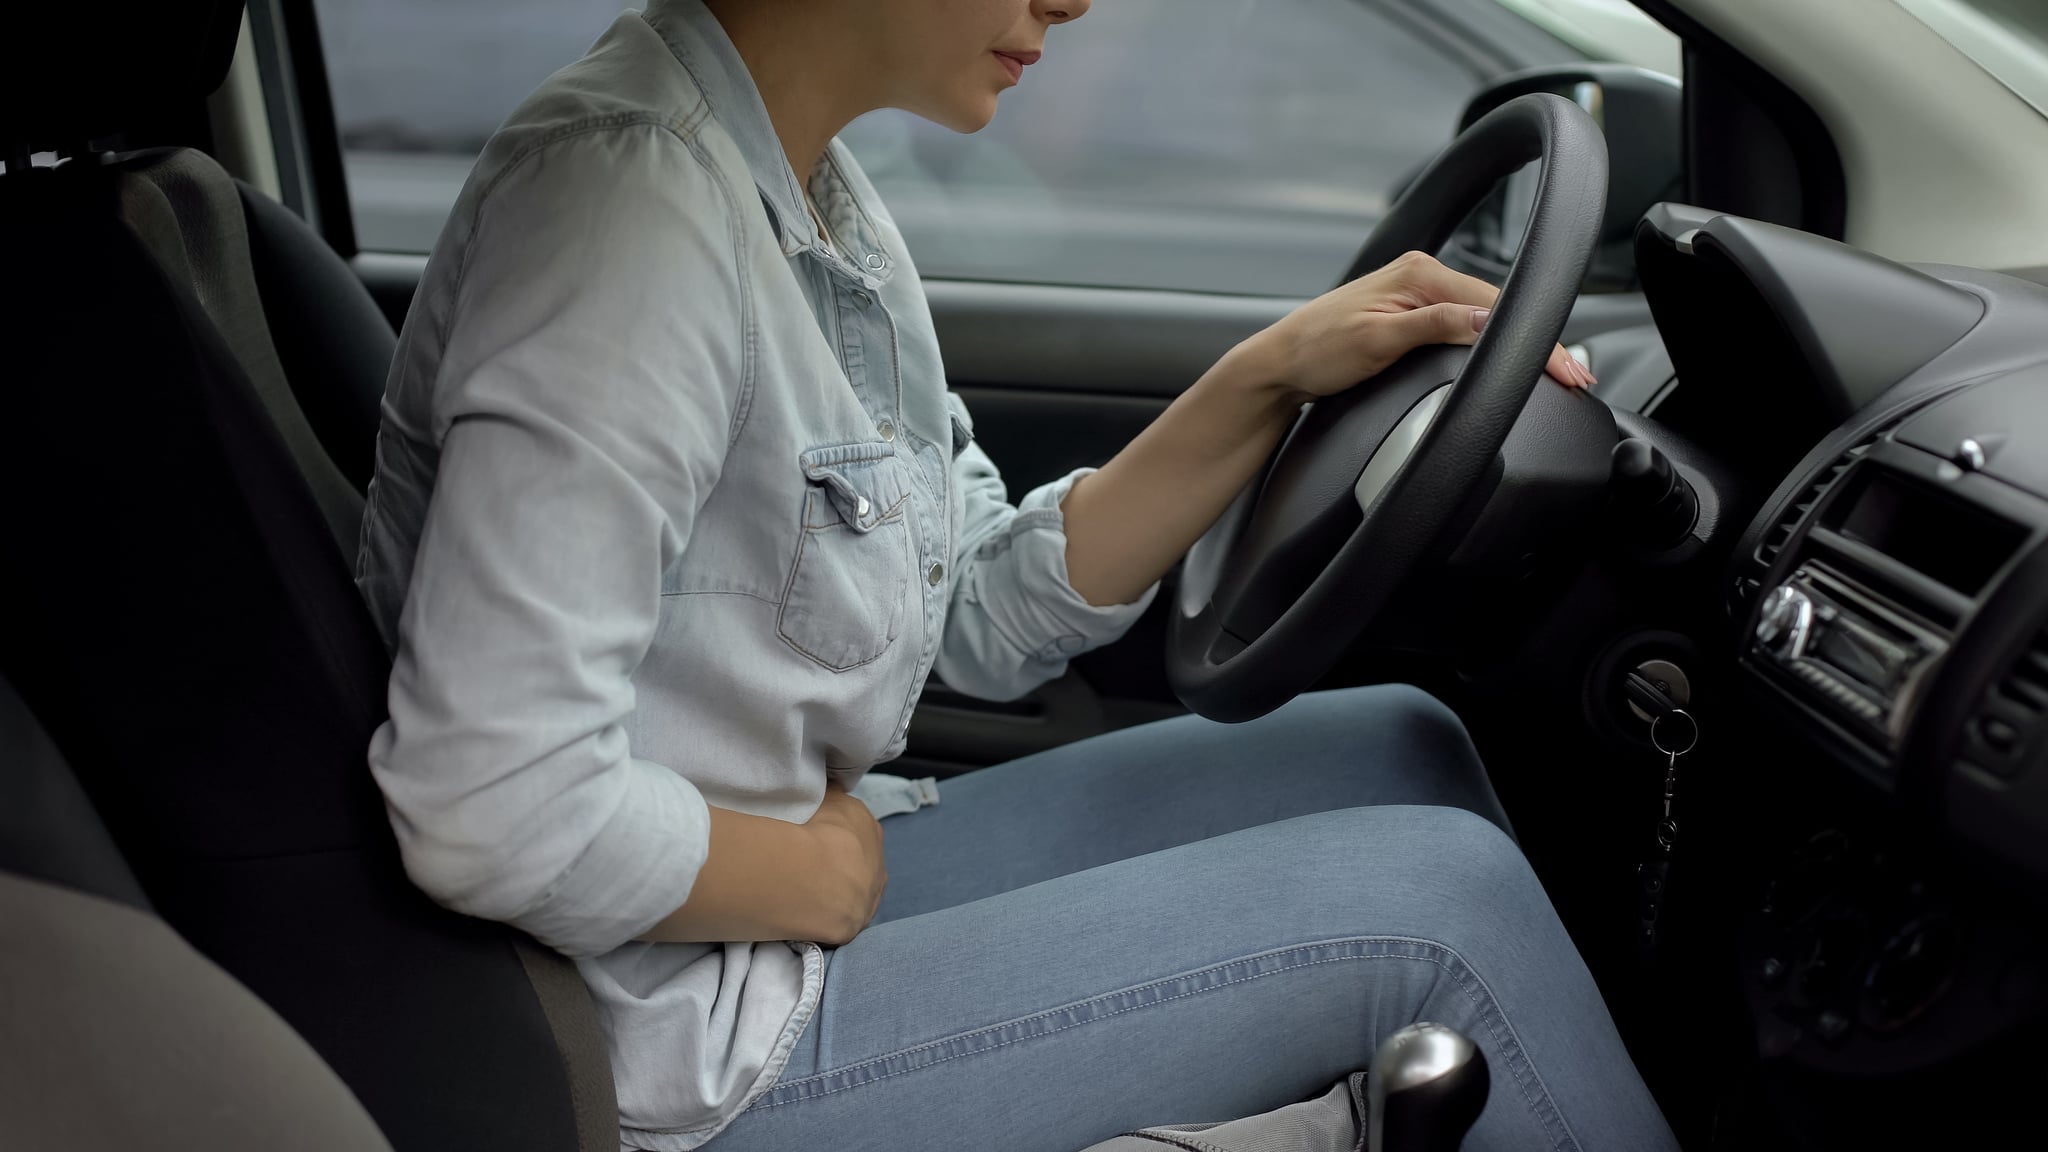 Attractive lady driving car feeling strong premenstrual pain, hormone imbalance